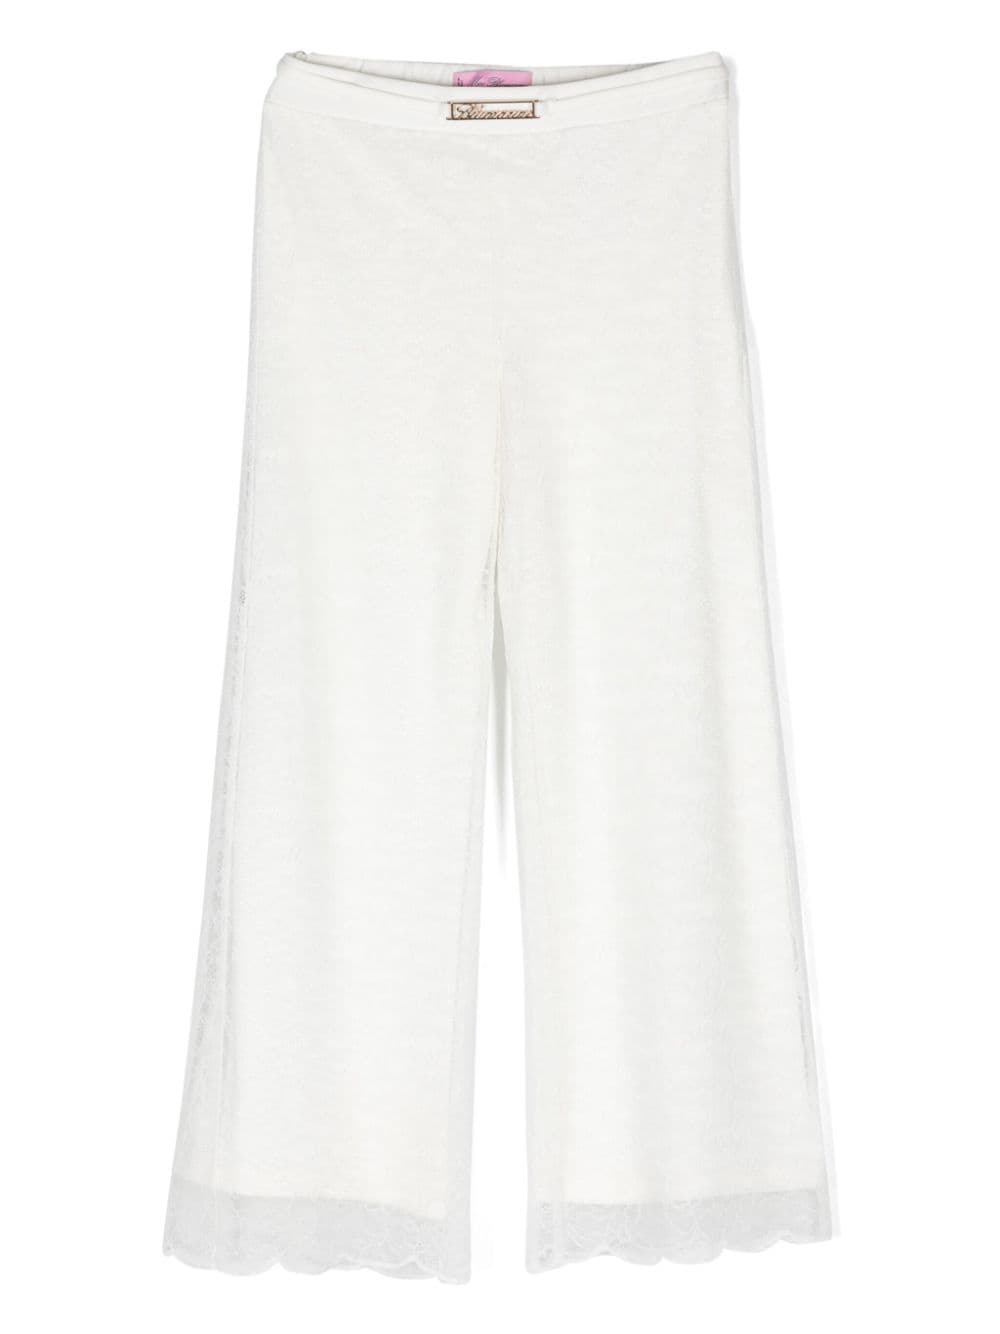 White lace trousers for girls